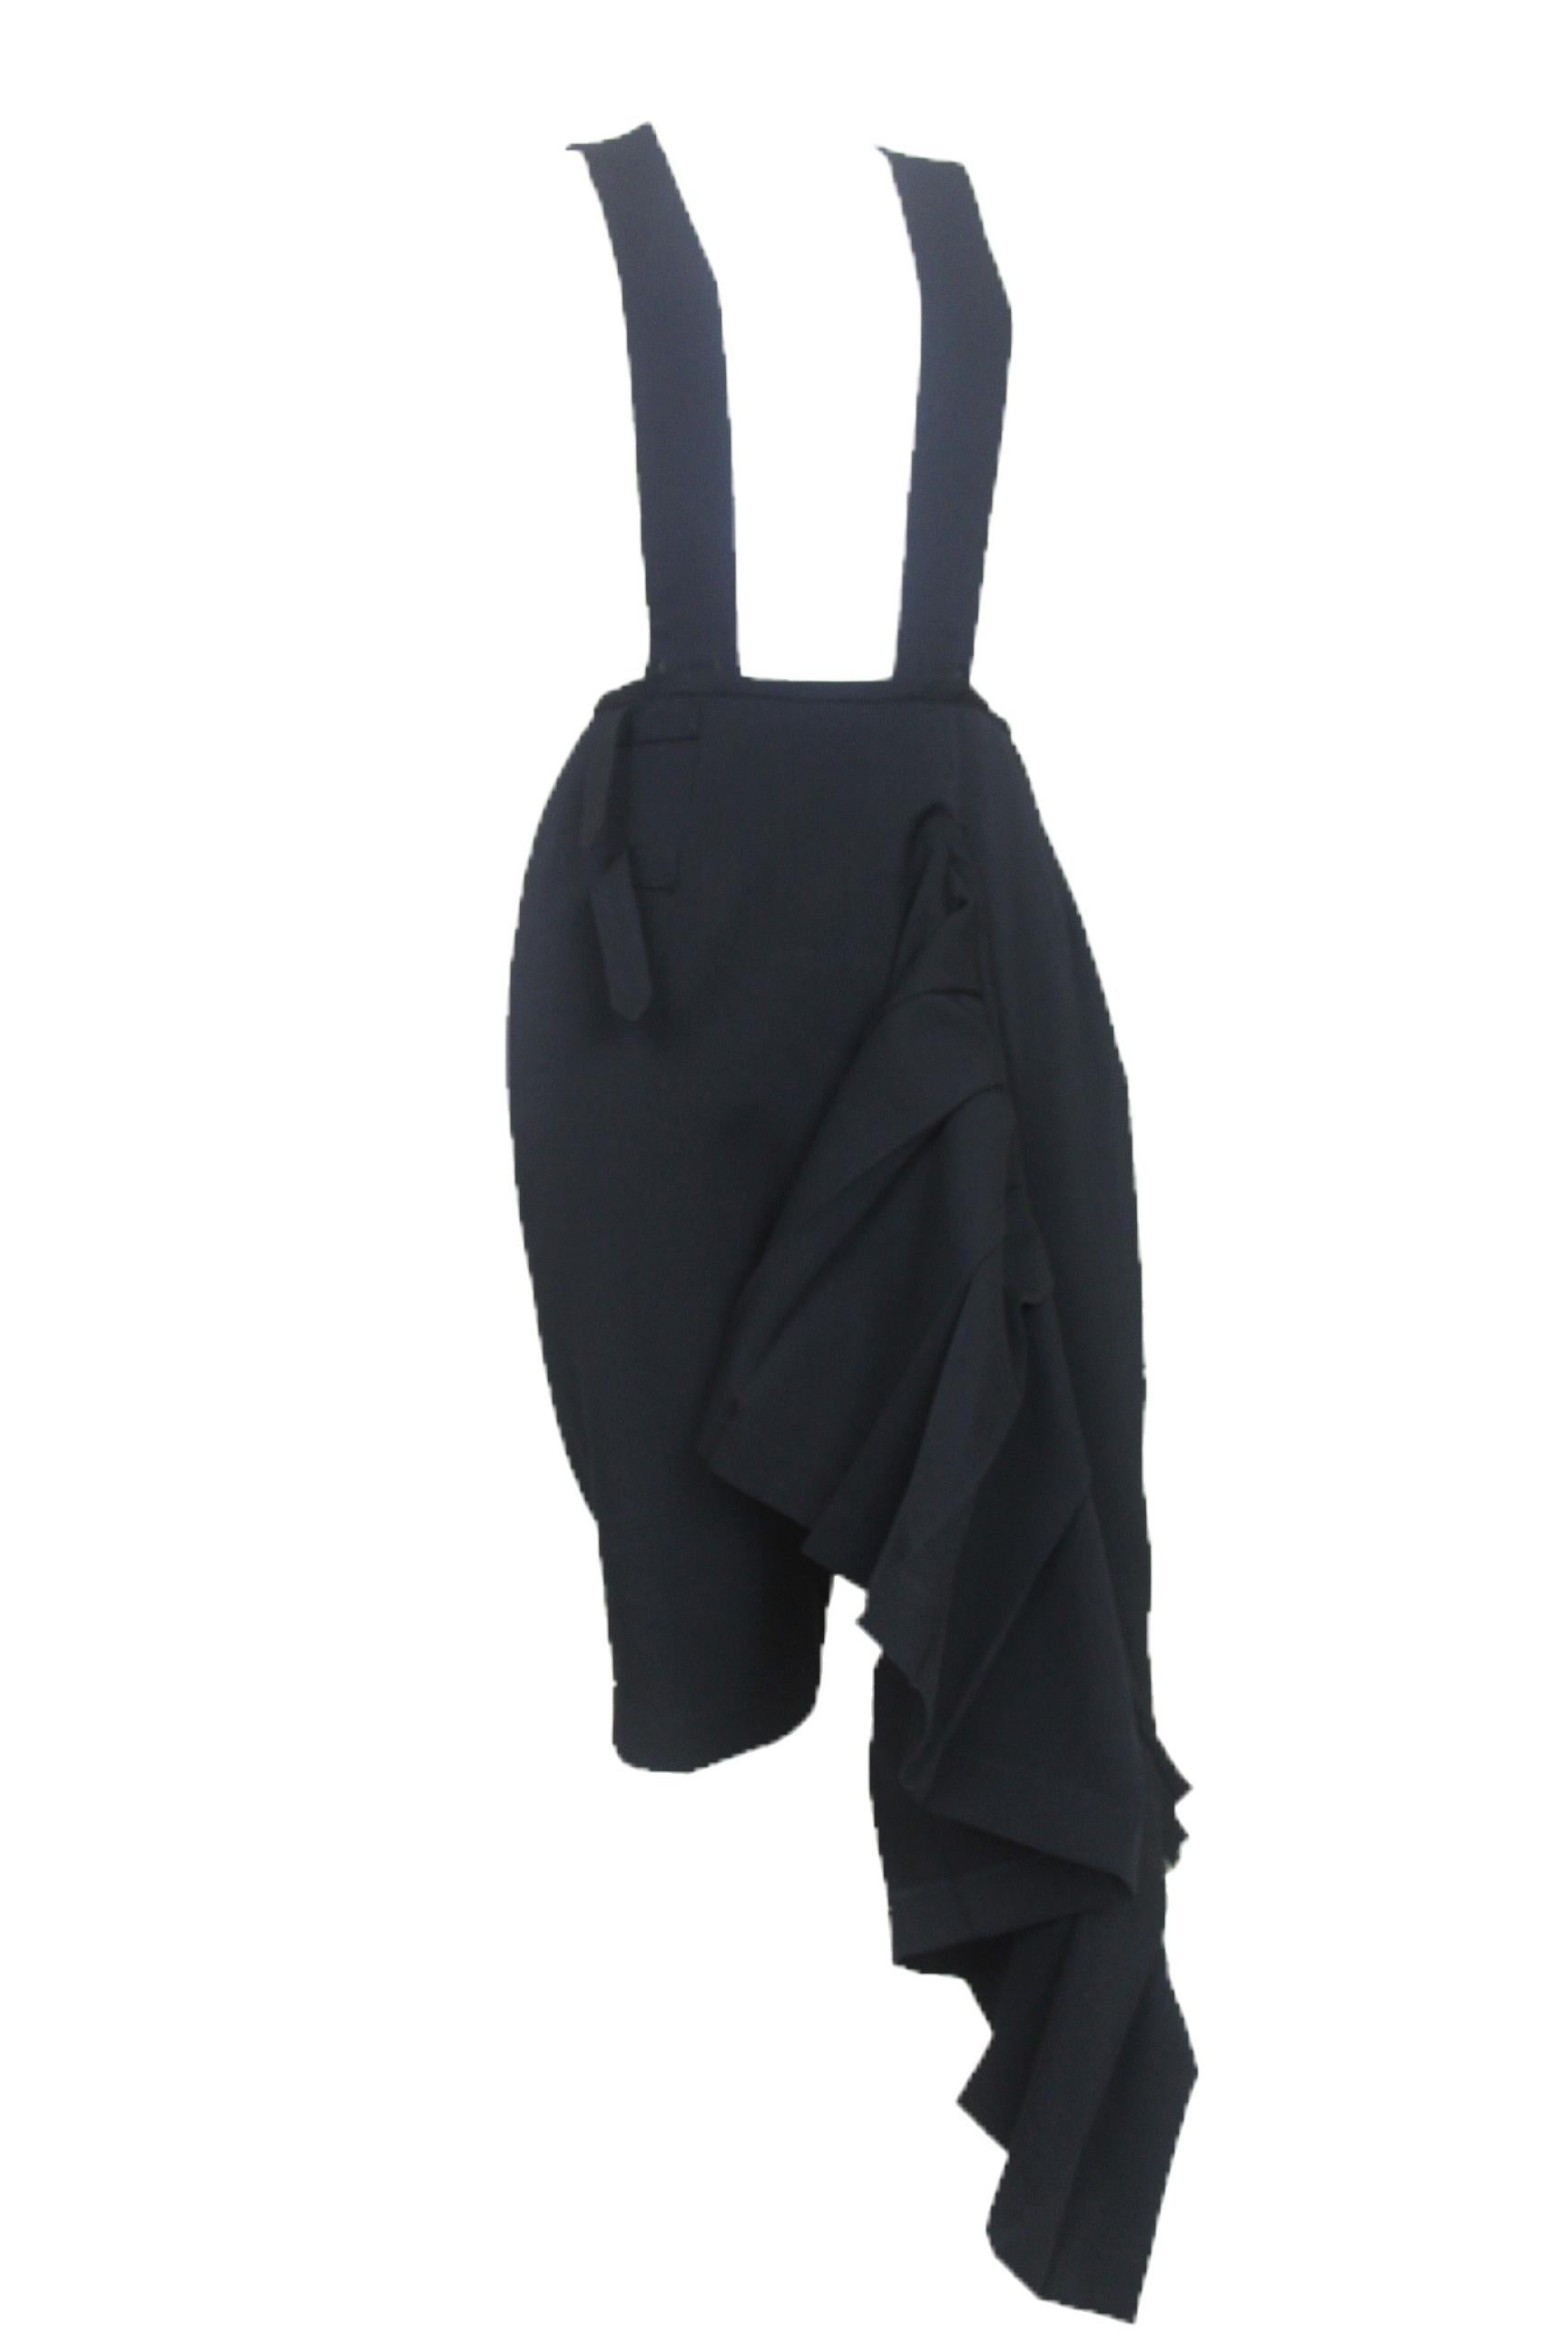 Comme des Garcons 1989 Collection Reverse Dungarees with attached Skirt For Sale 1